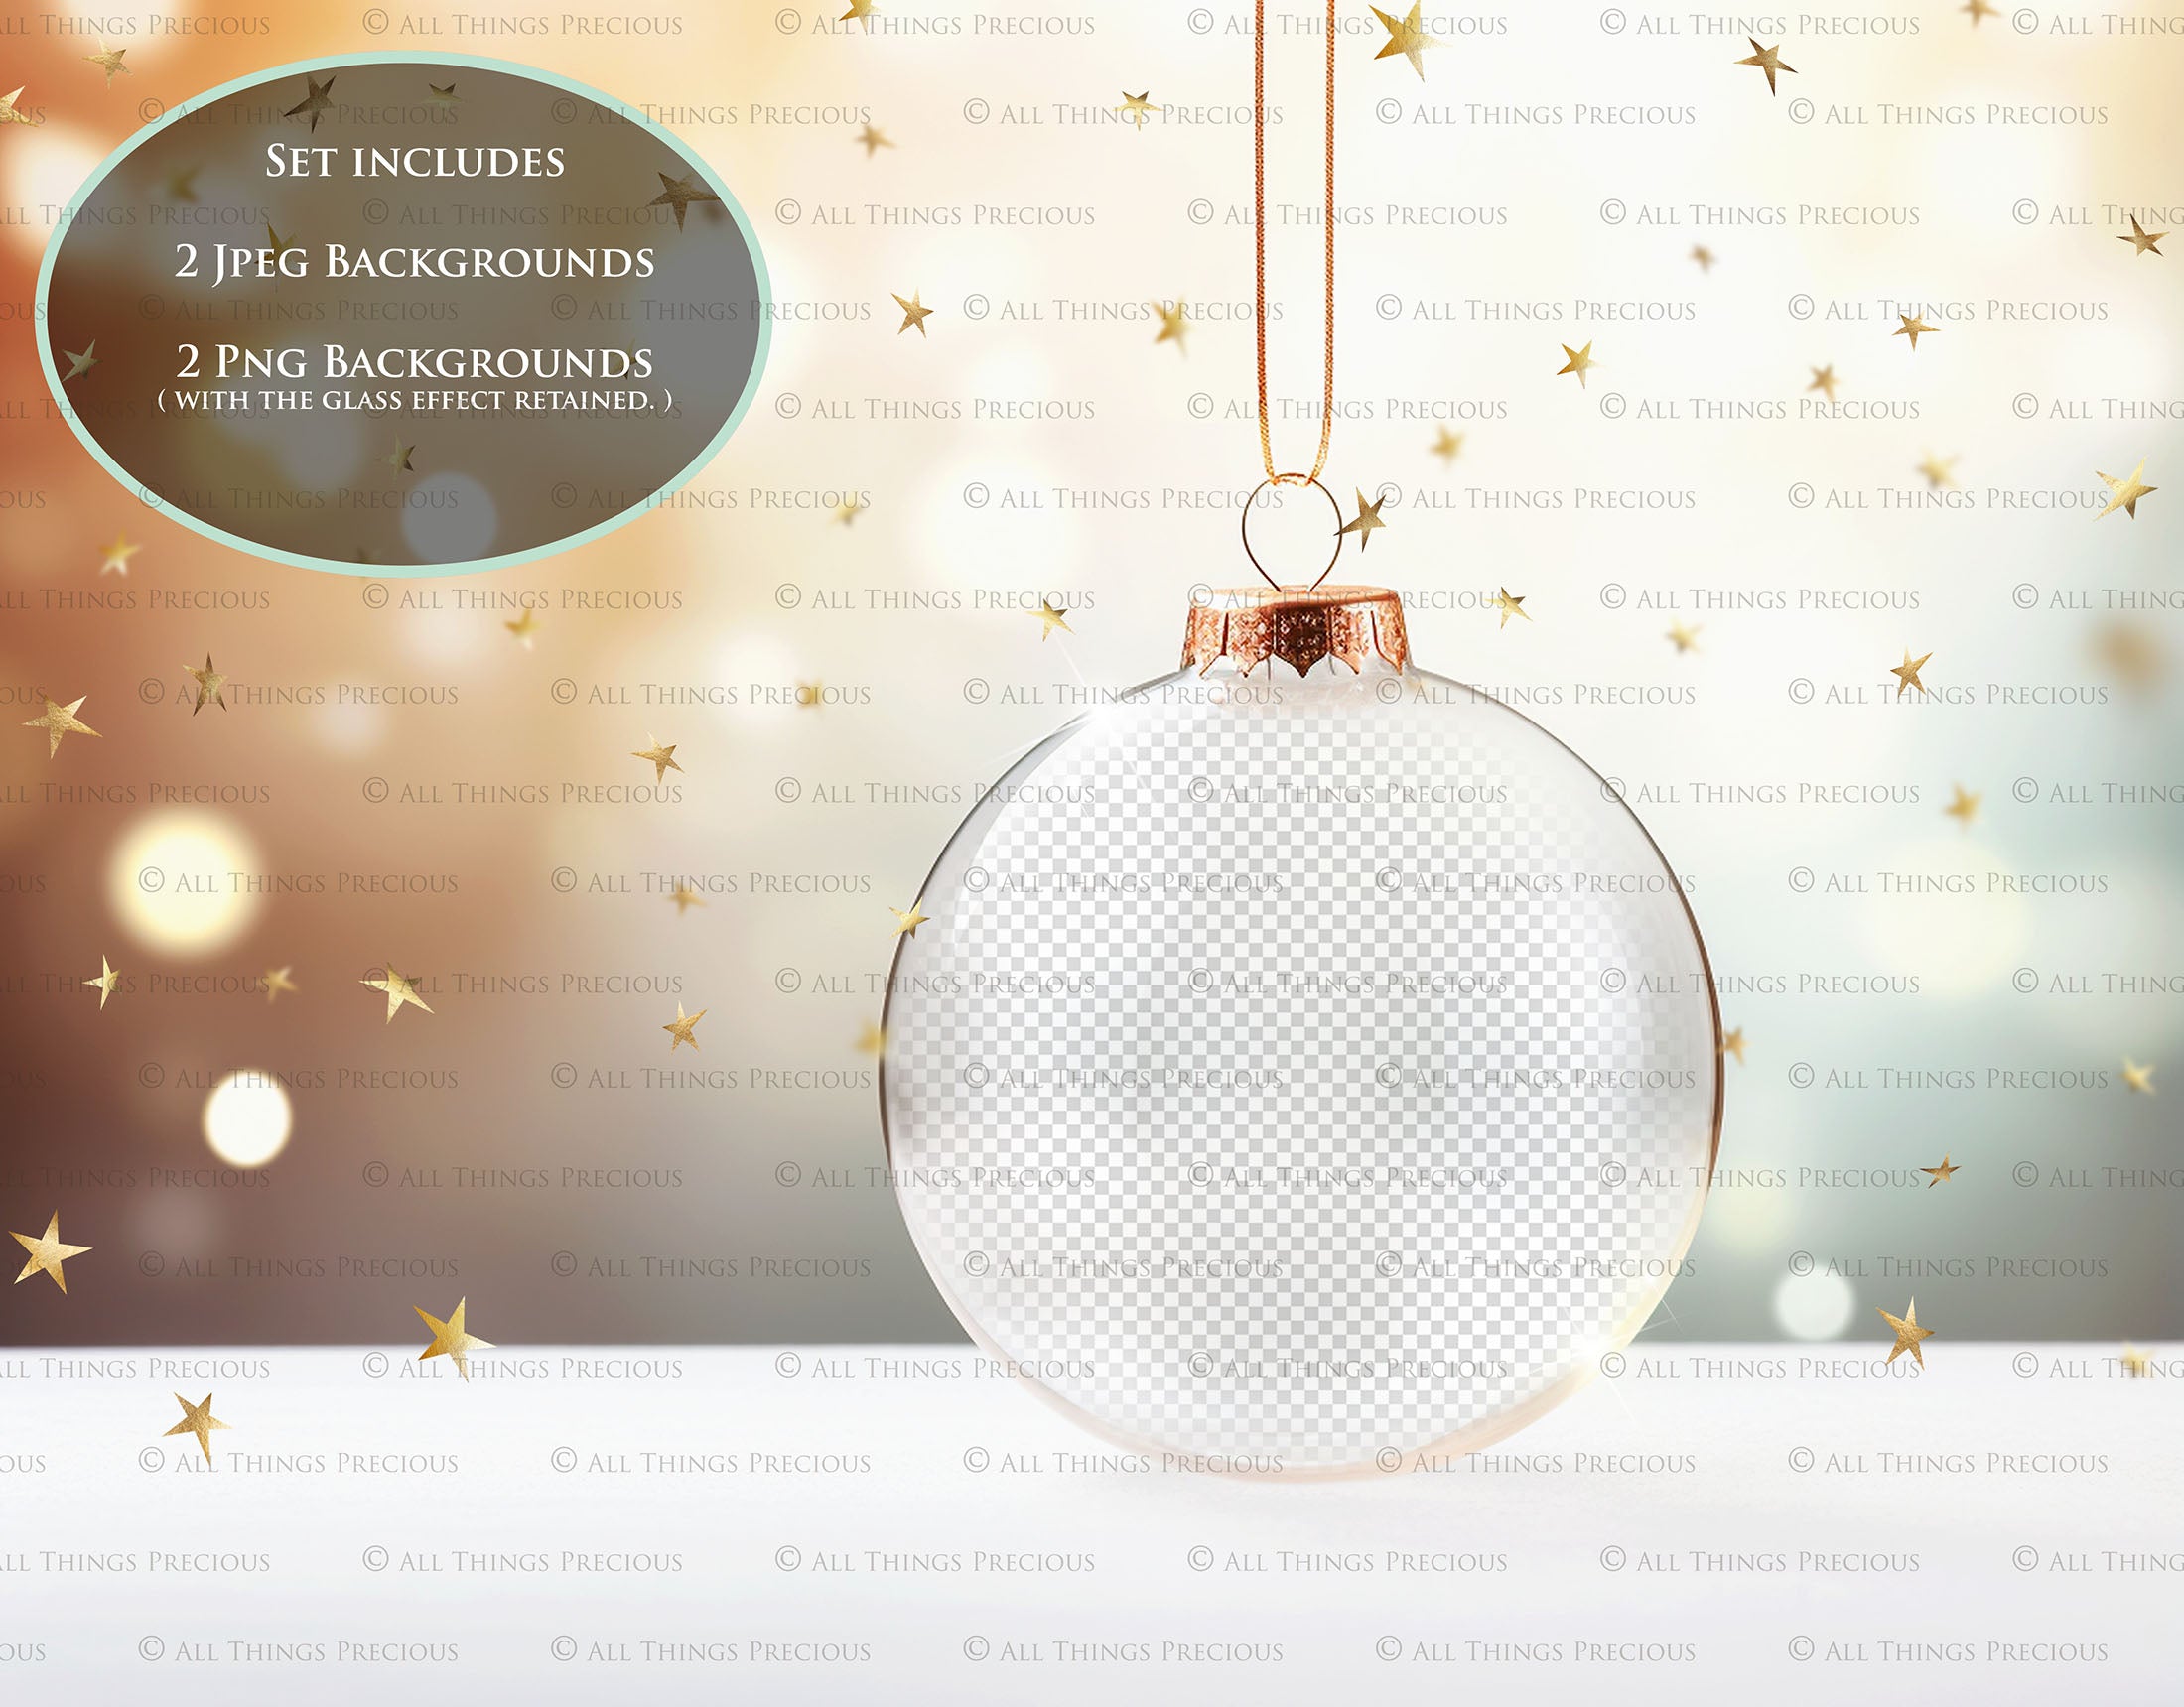 Christmas Glass Bauble Ornament Overlay and Background, with snow flurries and a PSD template. The globe is transparent. This file is 6000 x 4000, 300dpi. Photography, Scrapbooking, Photo Overlays, Print Art Card Edit Png, Jpeg, Psd. ATP Textures.